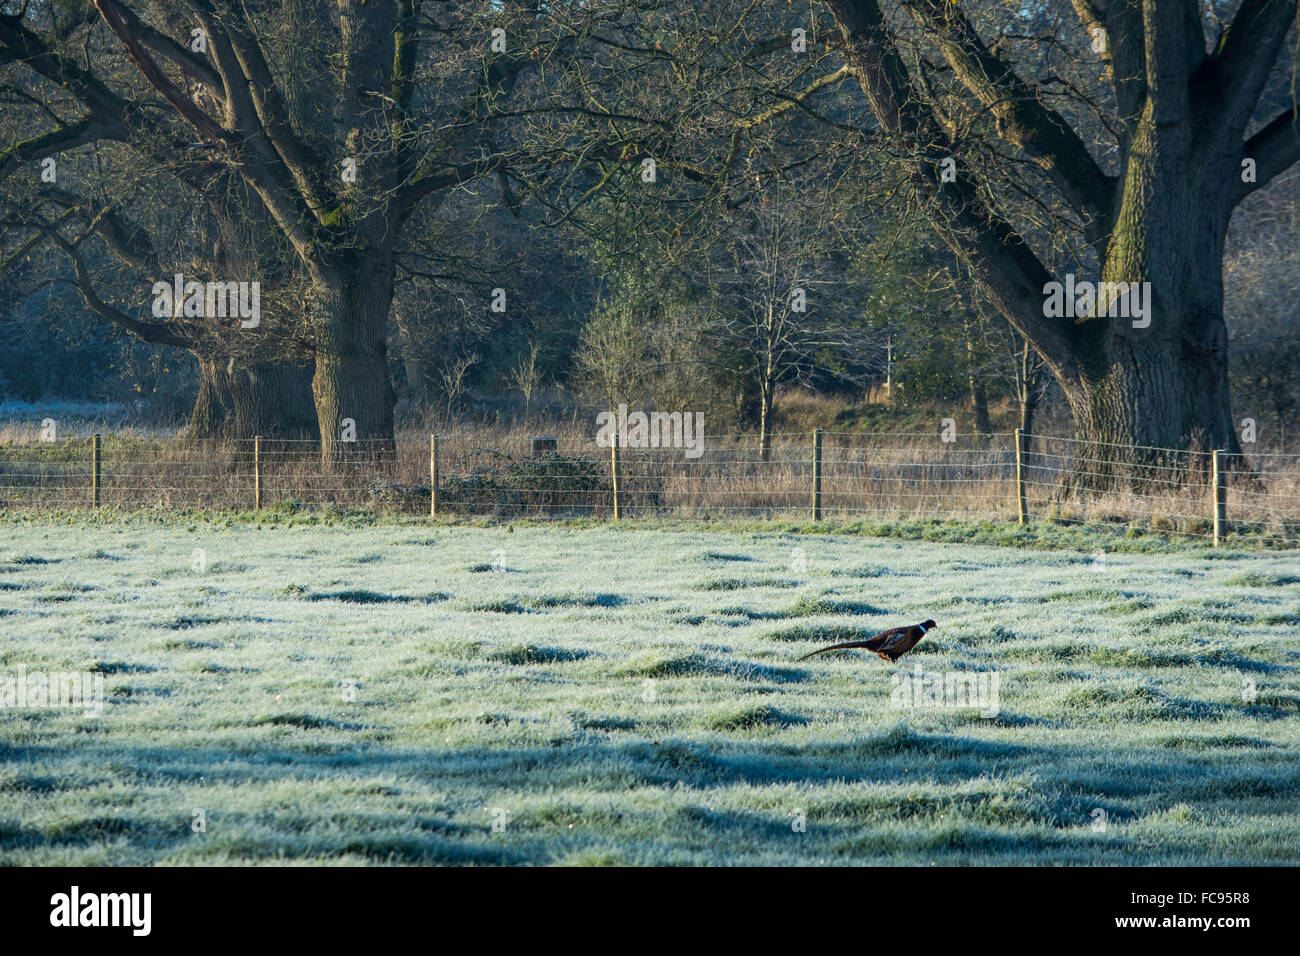 Pheasant in a Field Stock Photo